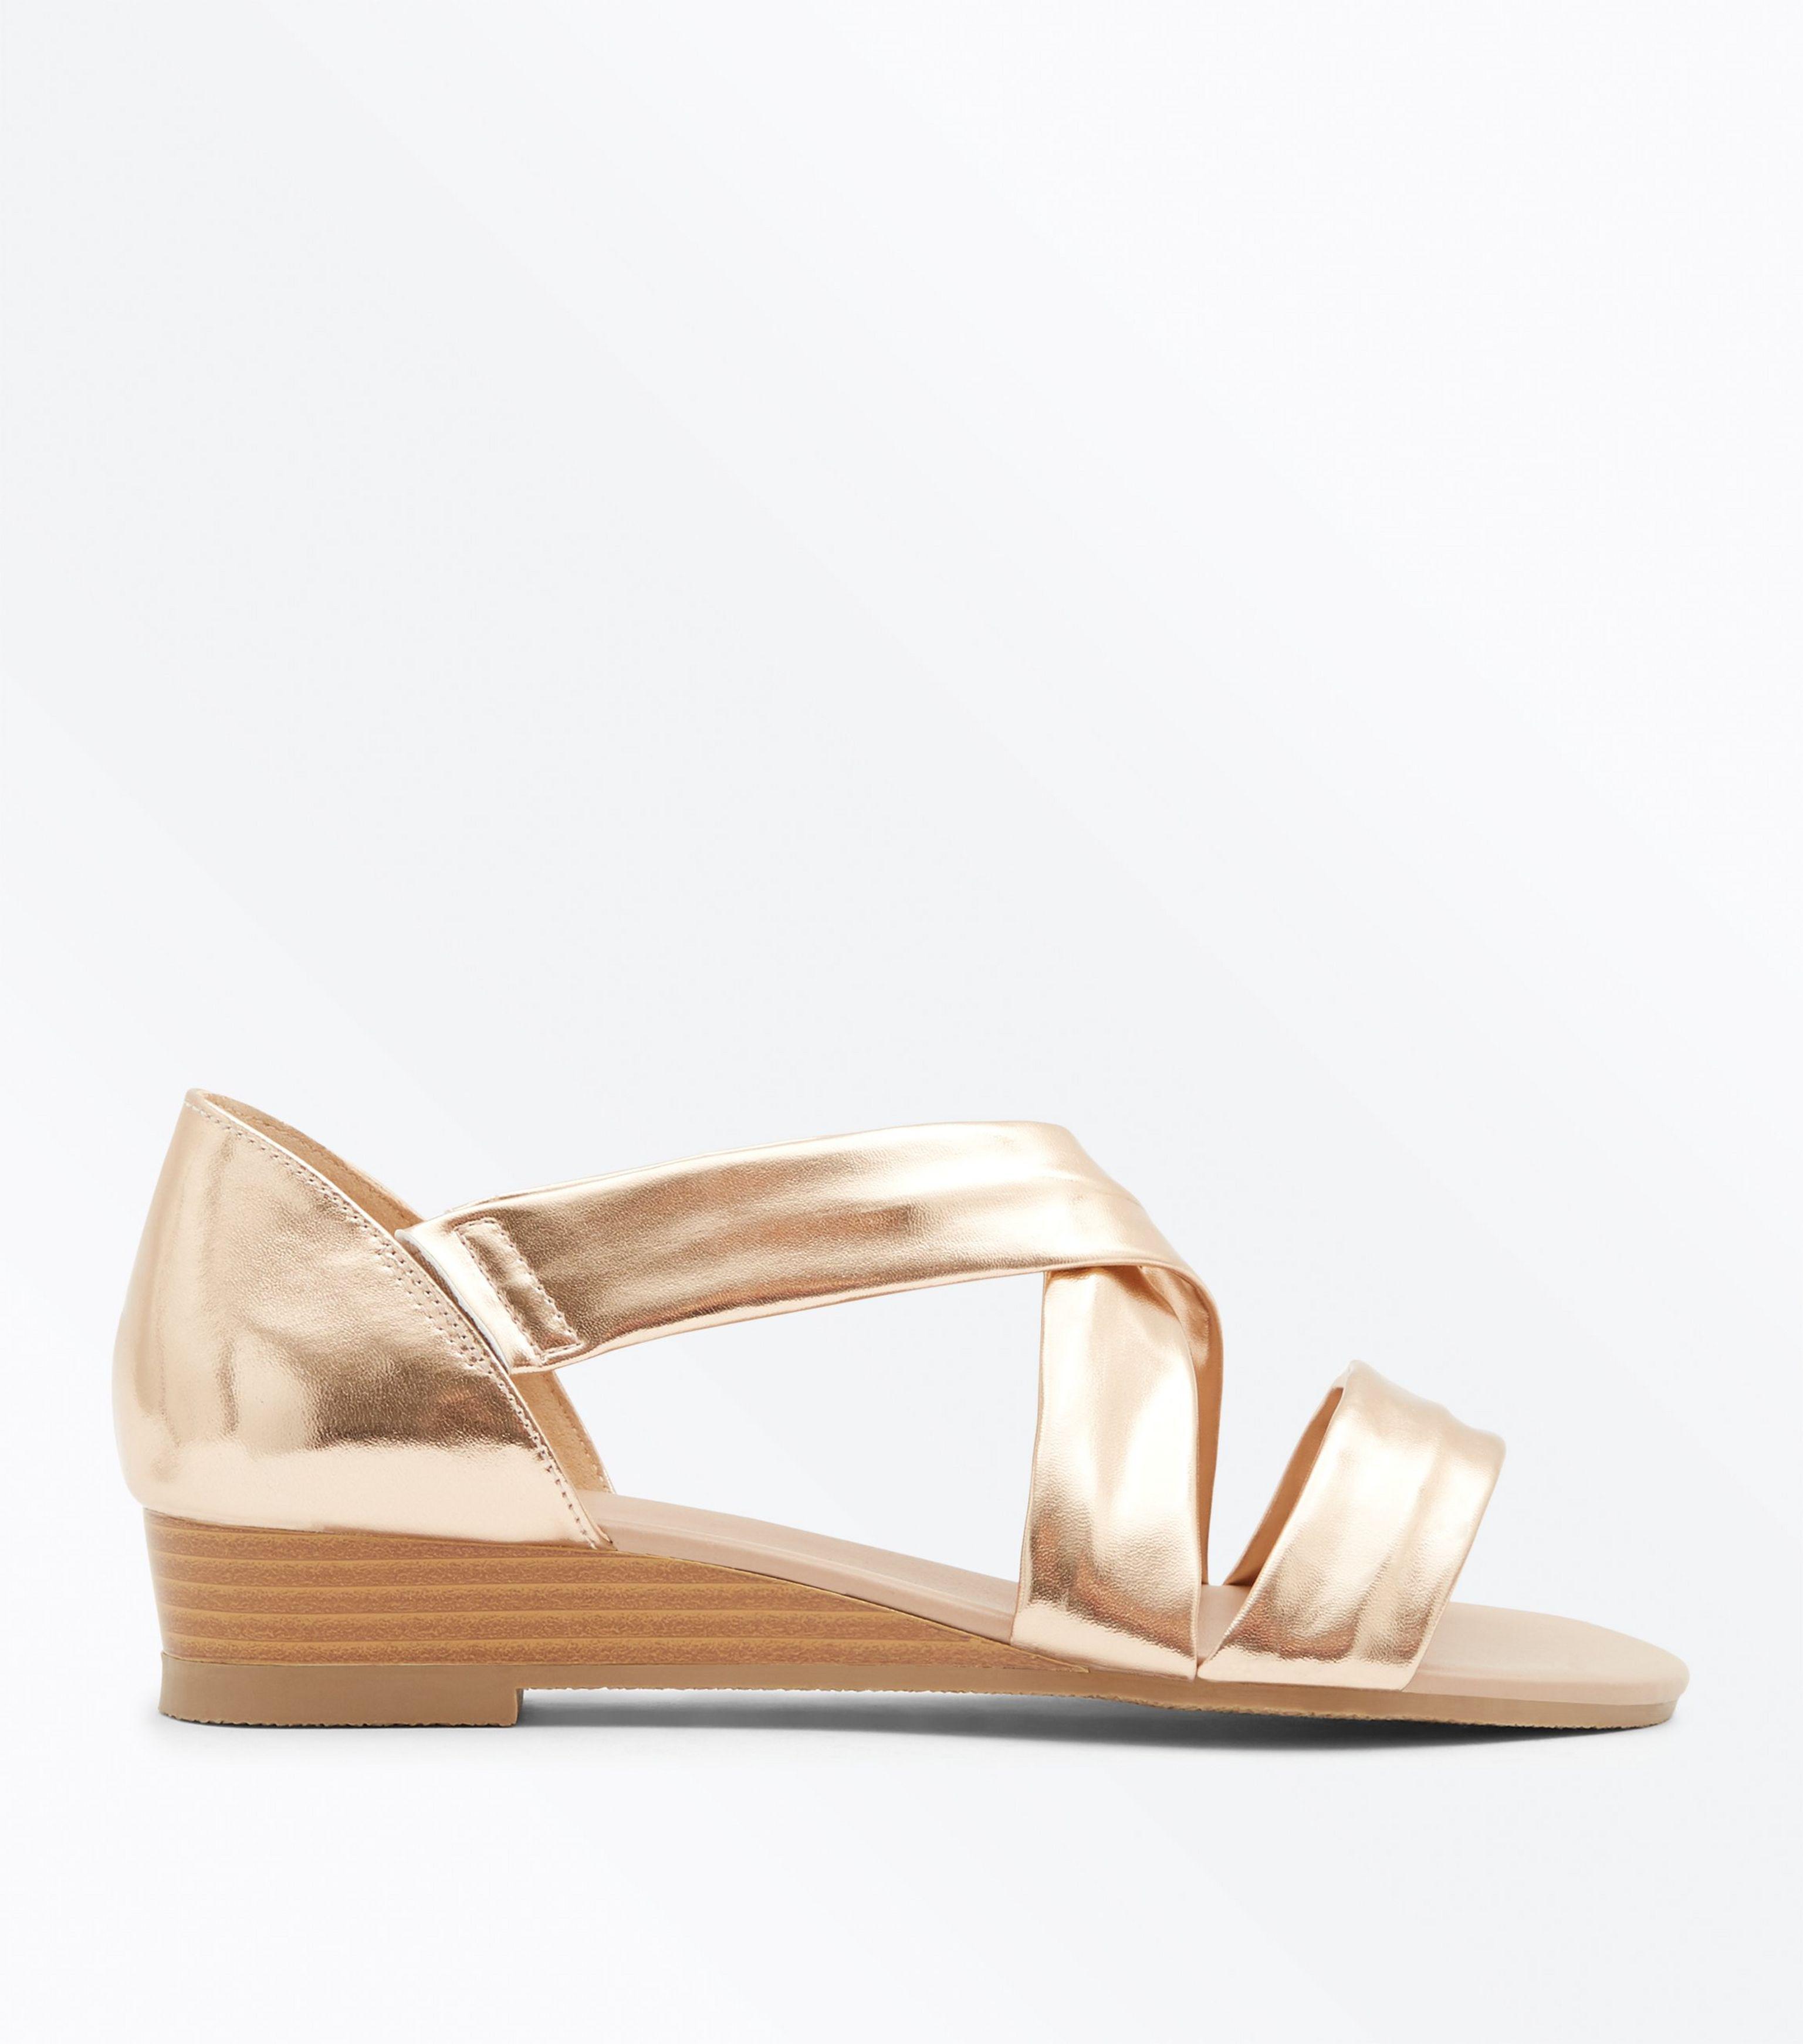 new look wide fit wedge sandals